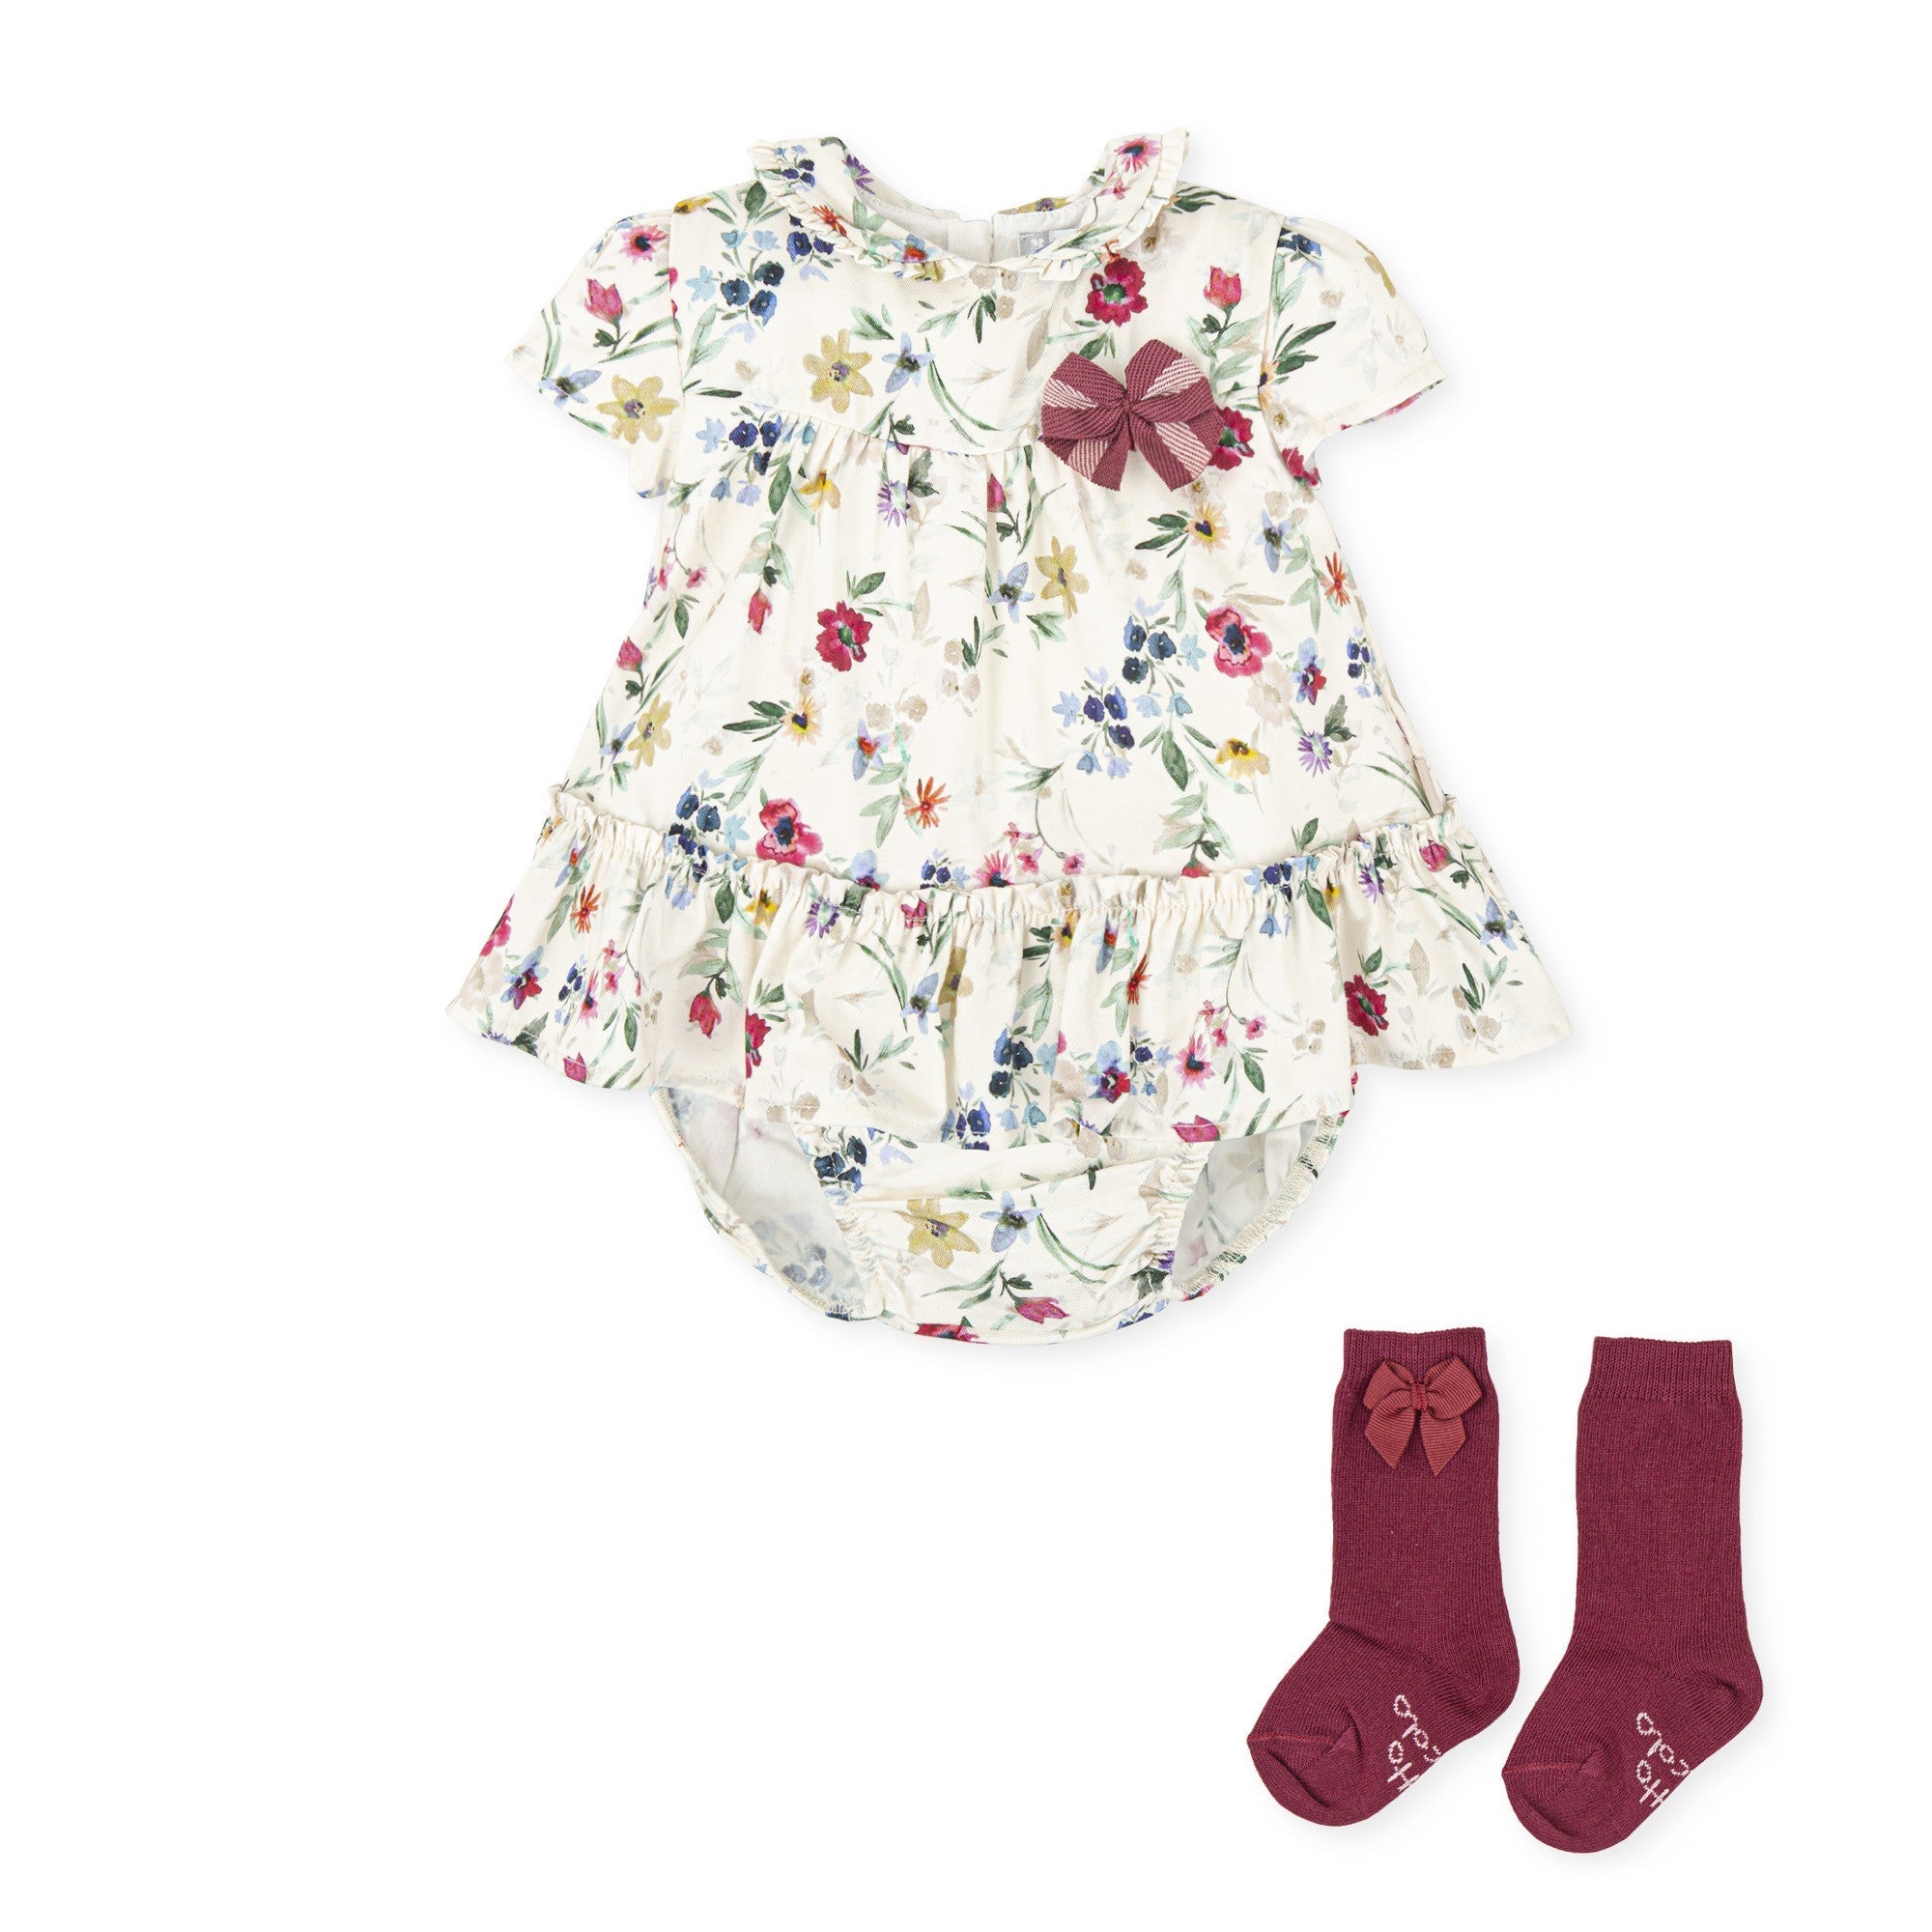 Floral Dress with Socks